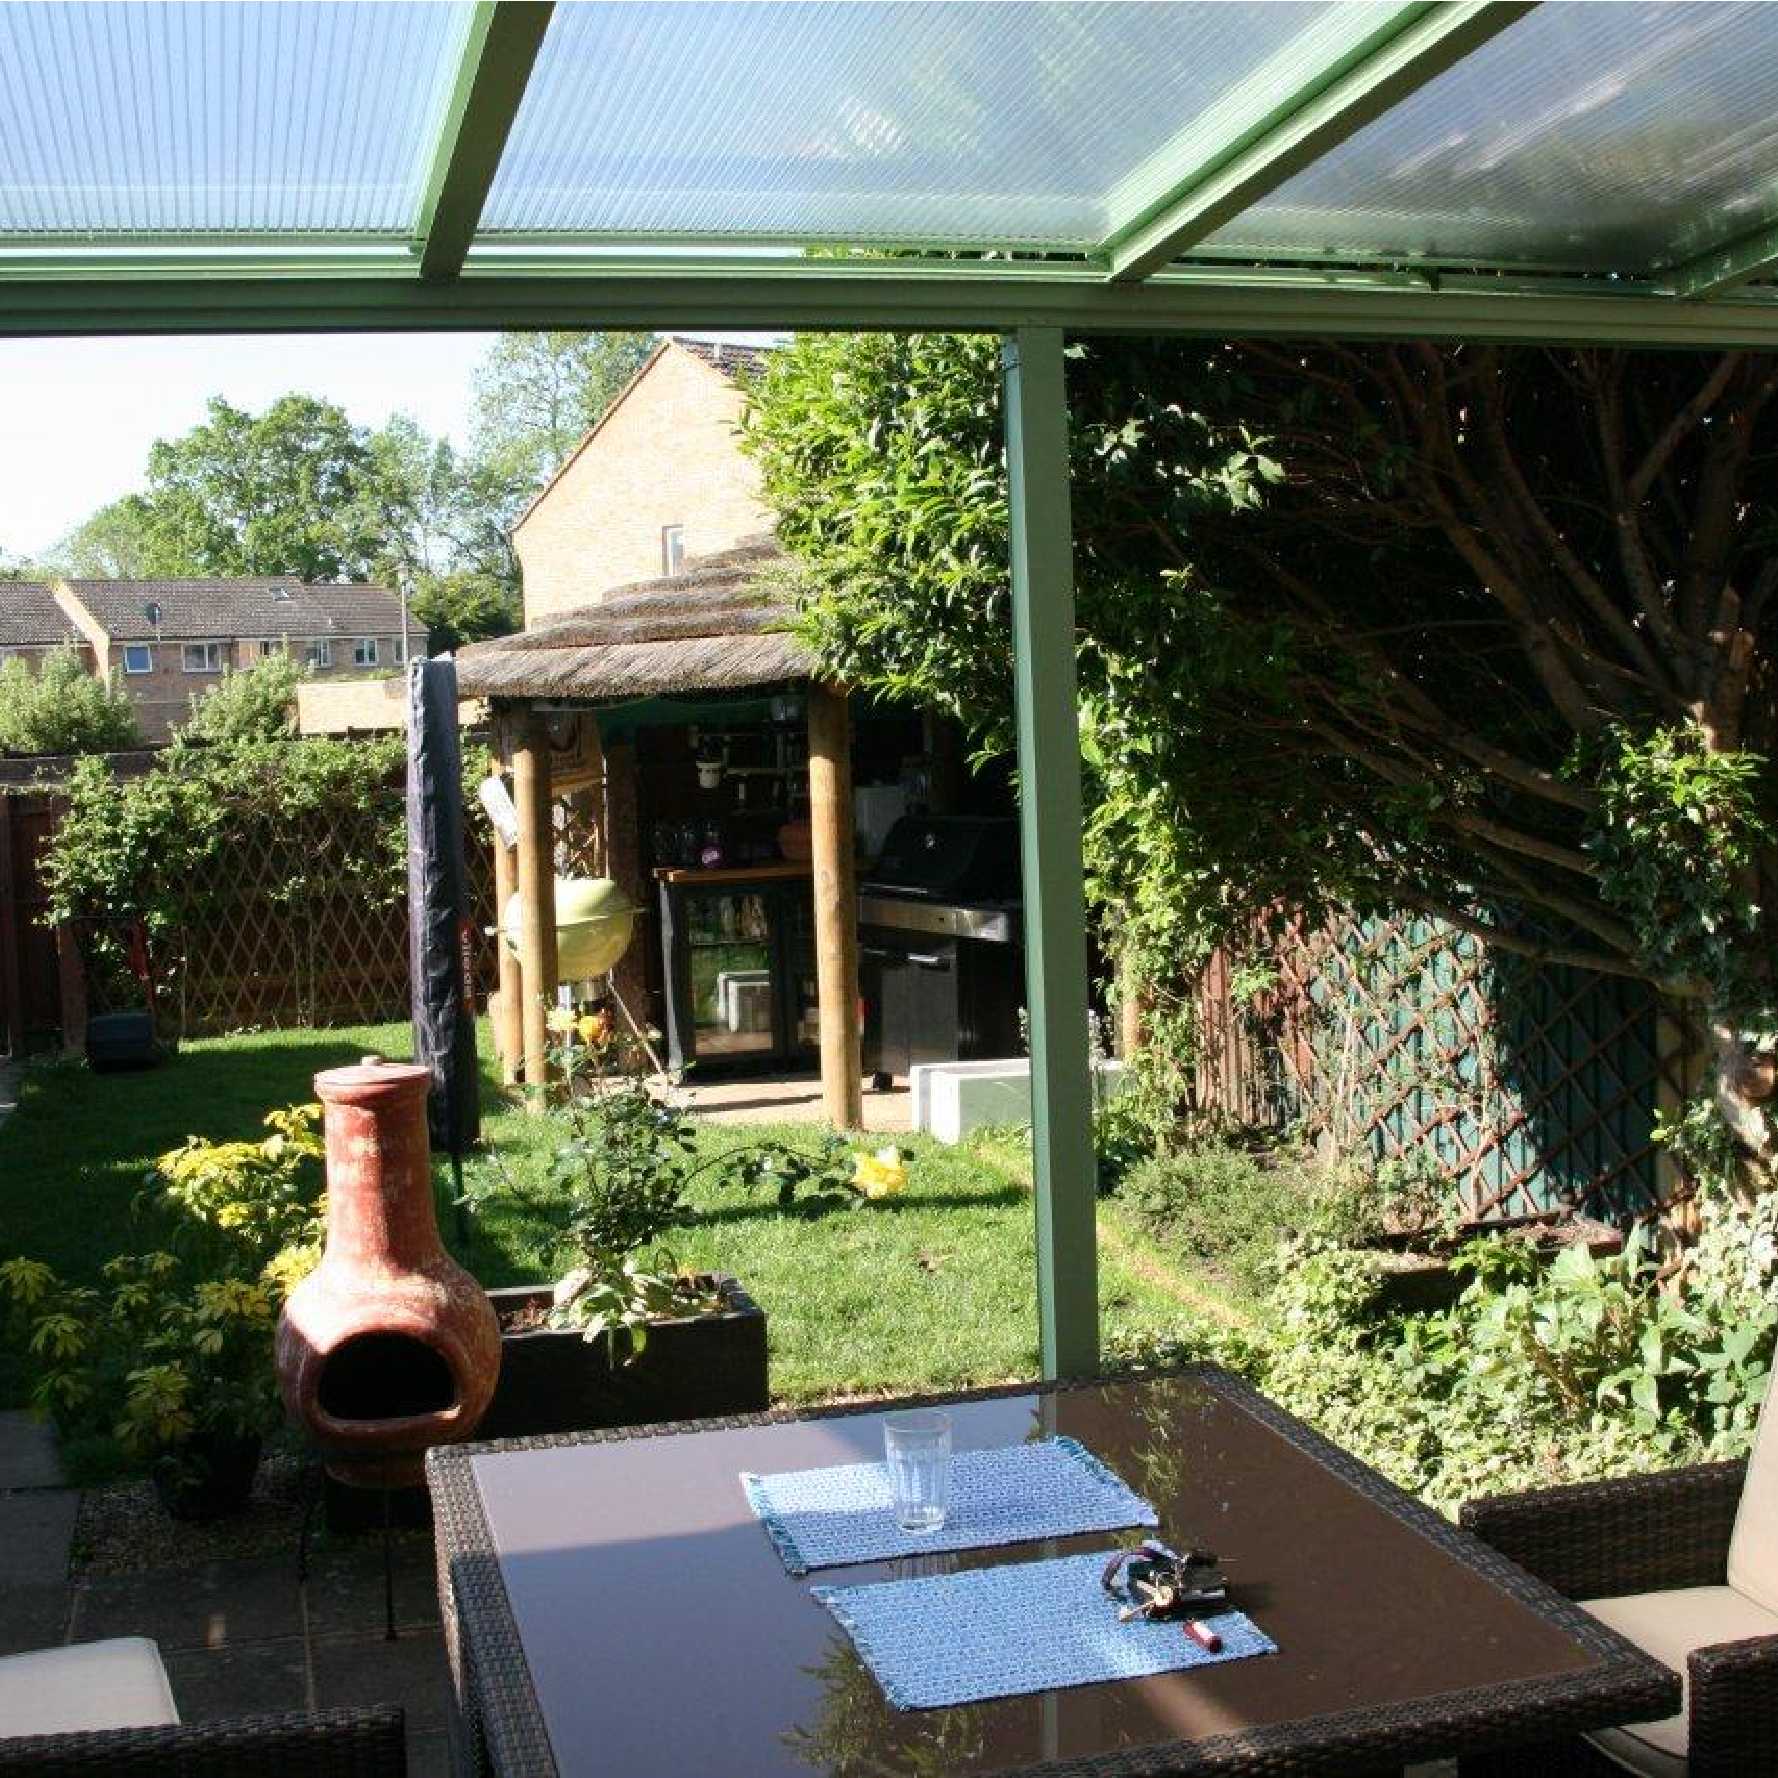 Affordable Omega Smart Lean-To Canopy, White with 16mm Polycarbonate Glazing - 3.1m (W) x 1.5m (P), (2) Supporting Posts